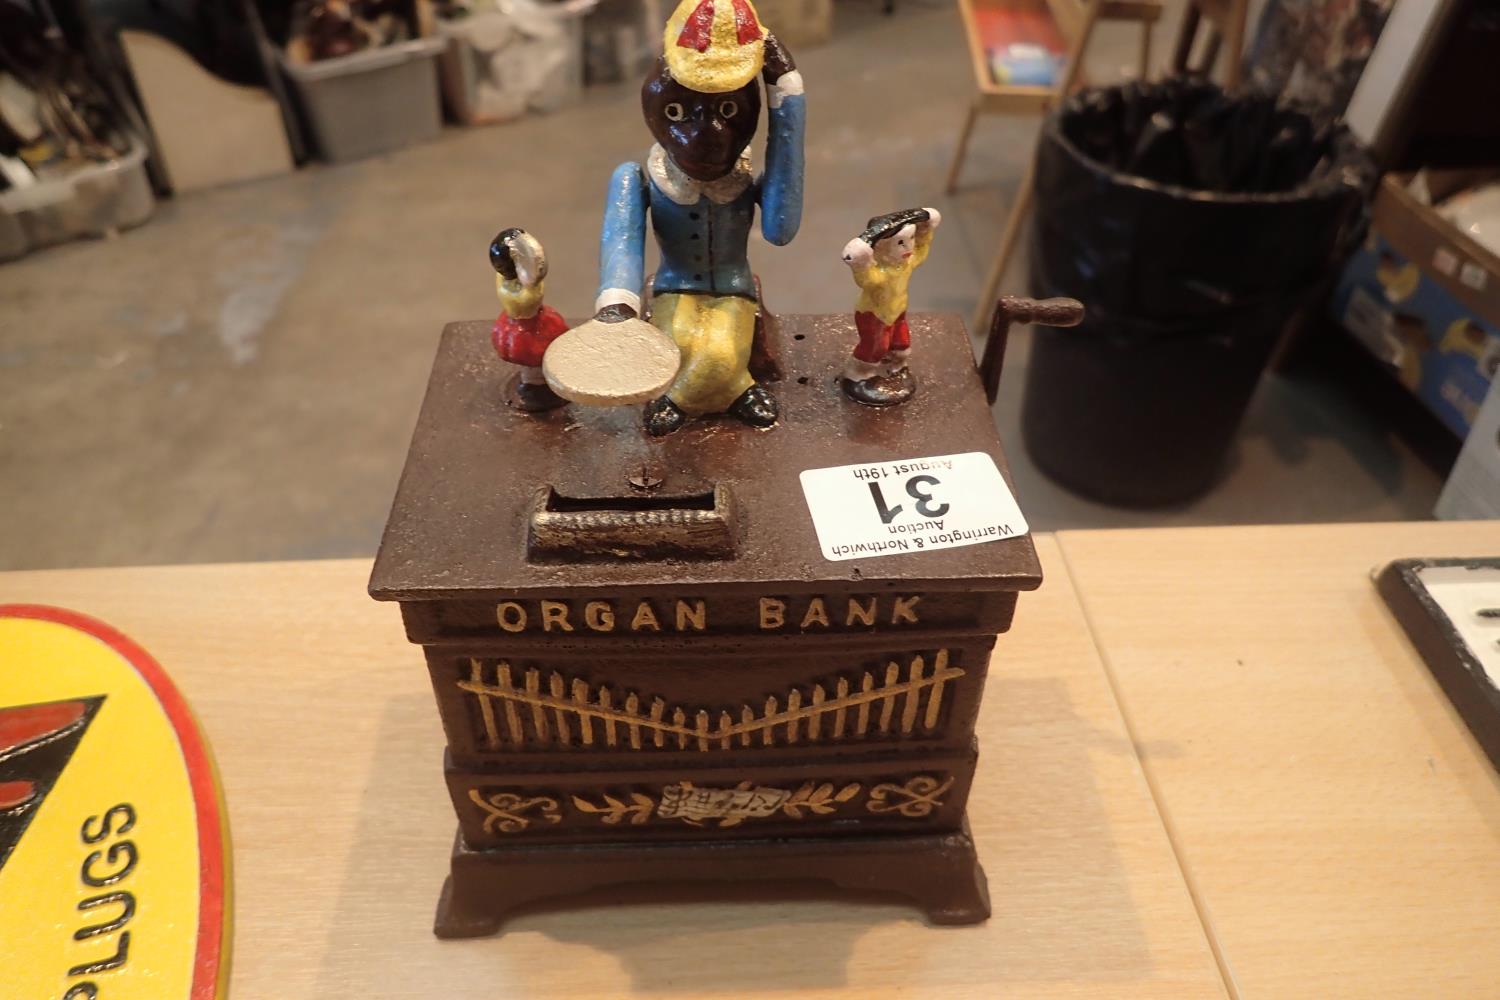 Cast iron Organ Bank moneybox, H: 19 cm. P&P Group 2 (£18+VAT for the first lot and £3+VAT for